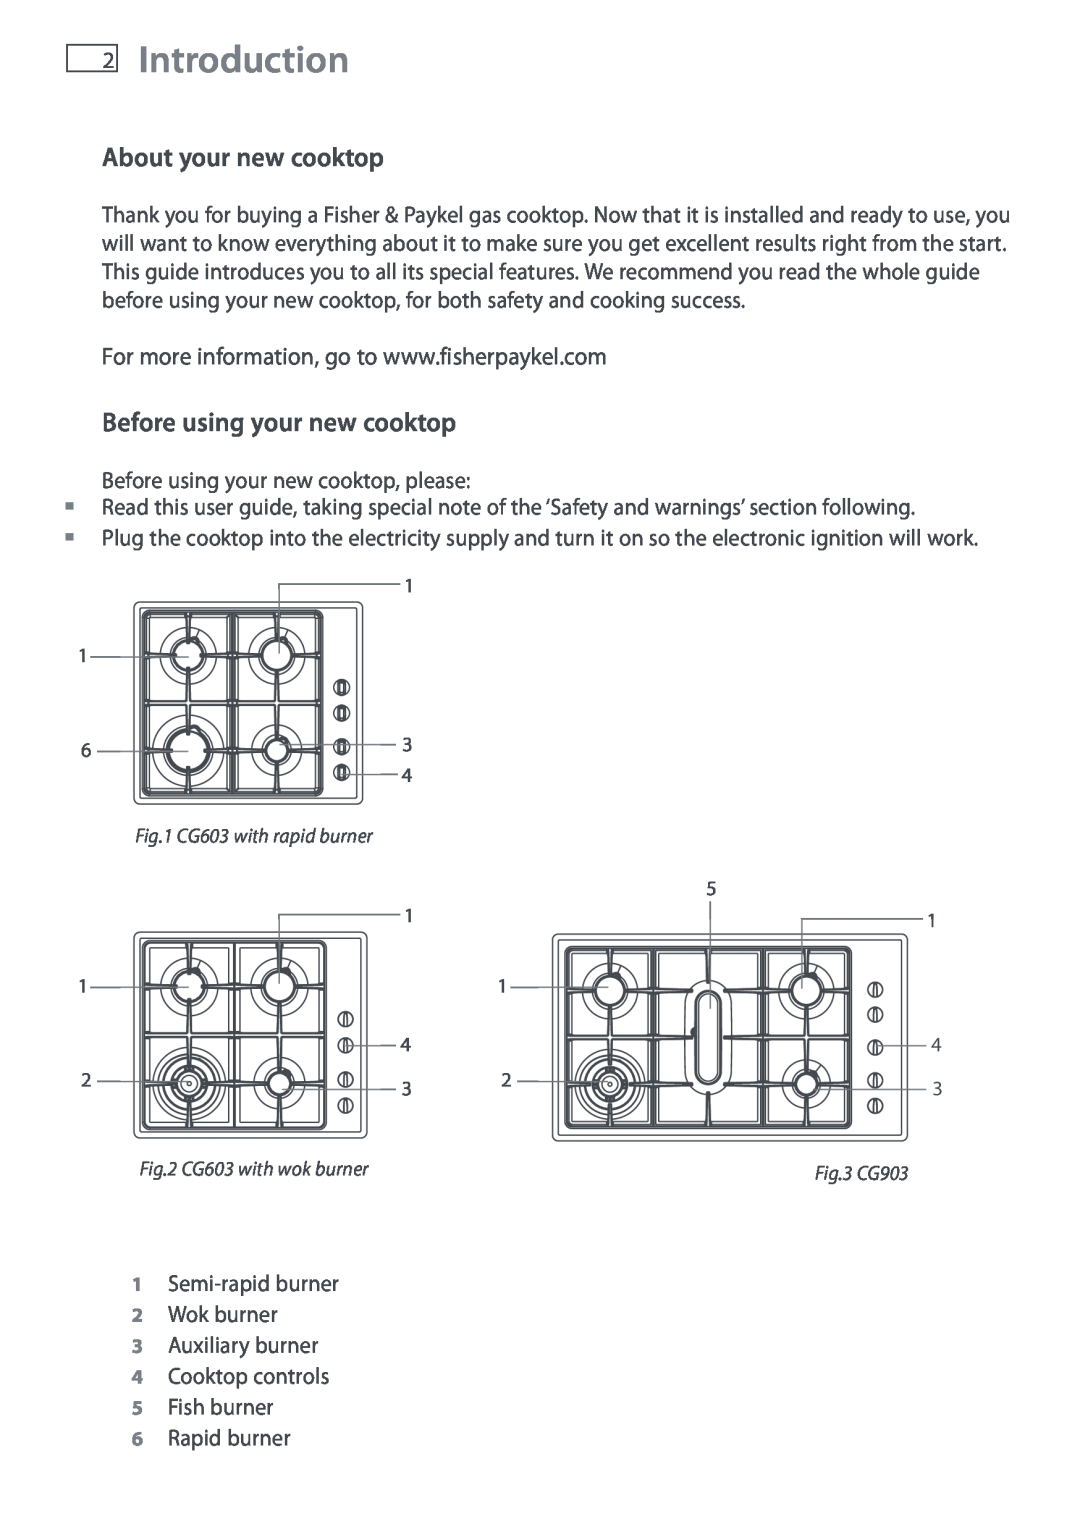 Fisher & Paykel CG603, CG903 manual Introduction, About your new cooktop, Before using your new cooktop 